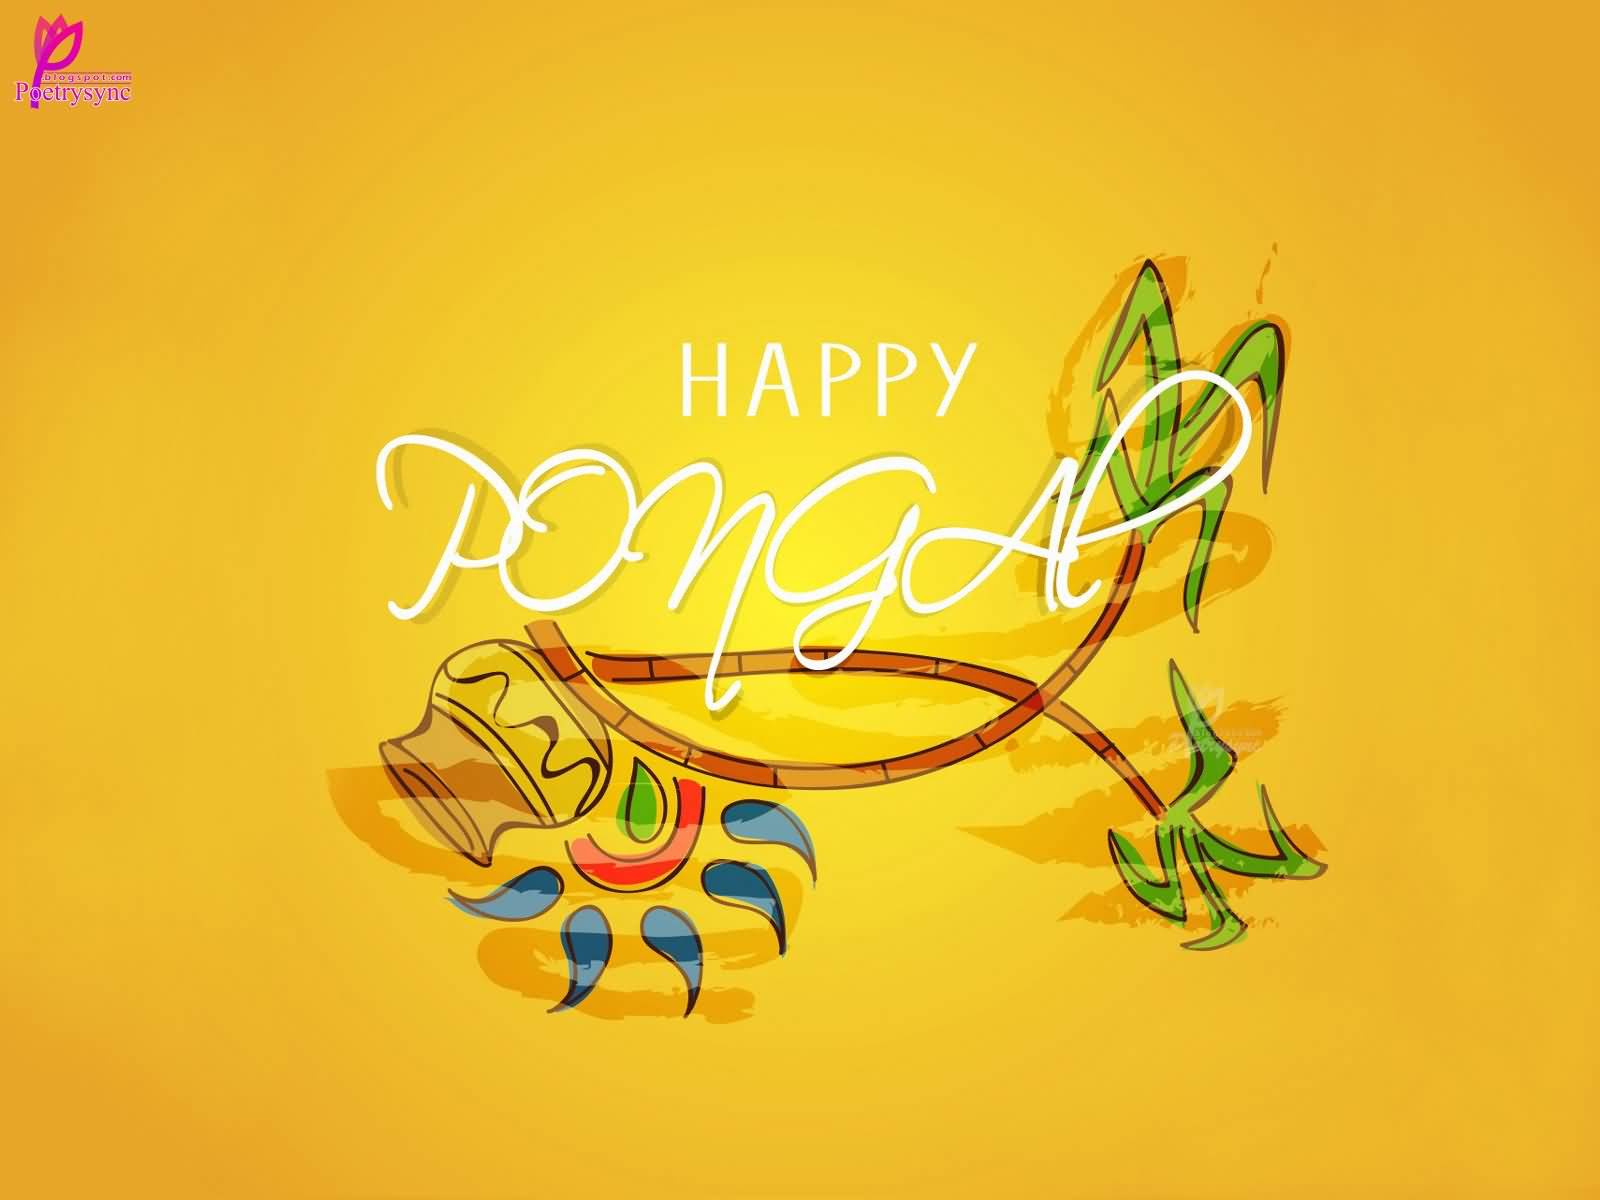 Happy Pongal Colorful Greeting Card